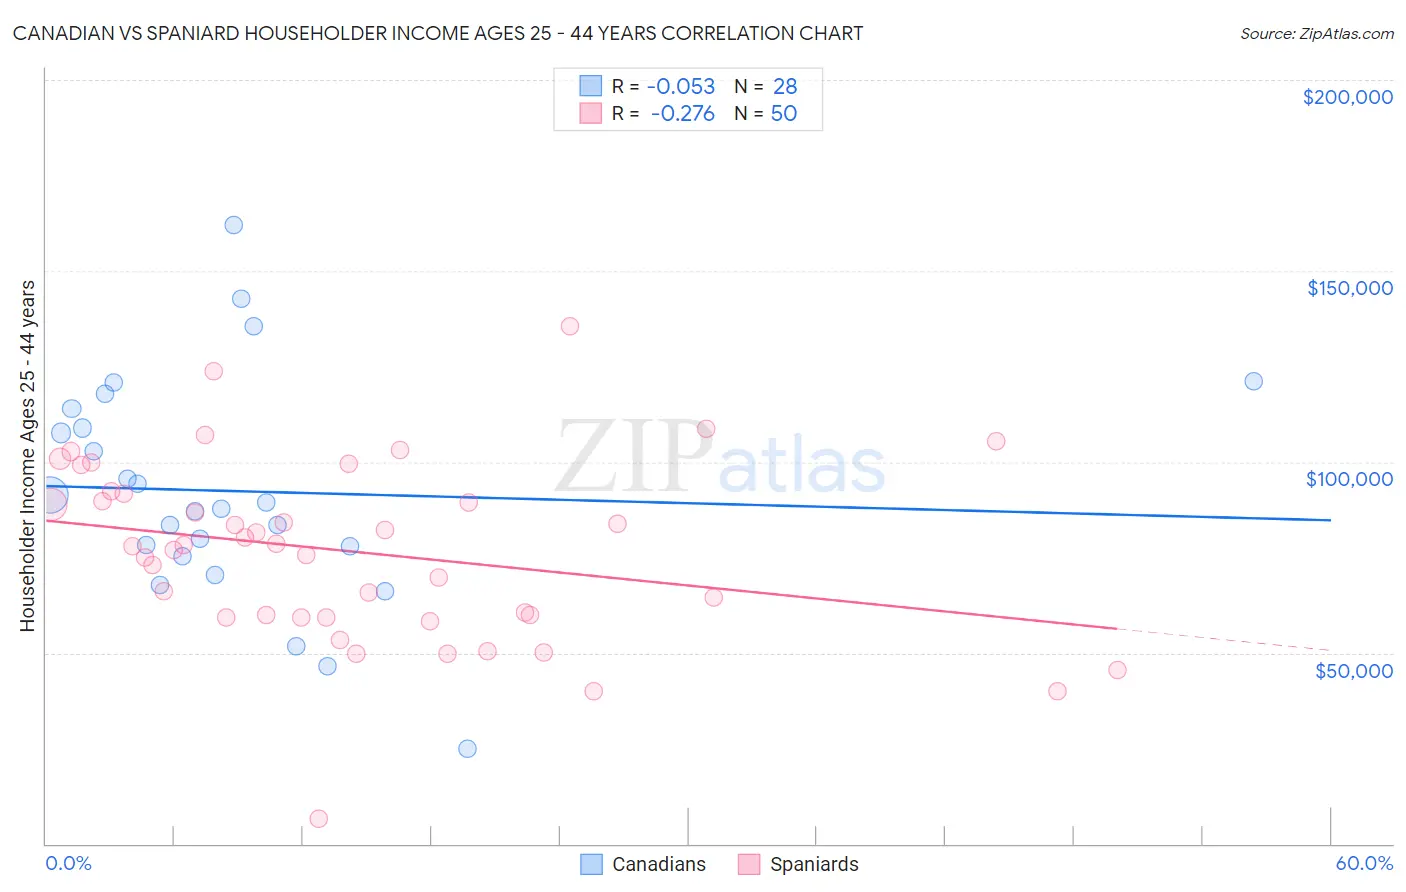 Canadian vs Spaniard Householder Income Ages 25 - 44 years